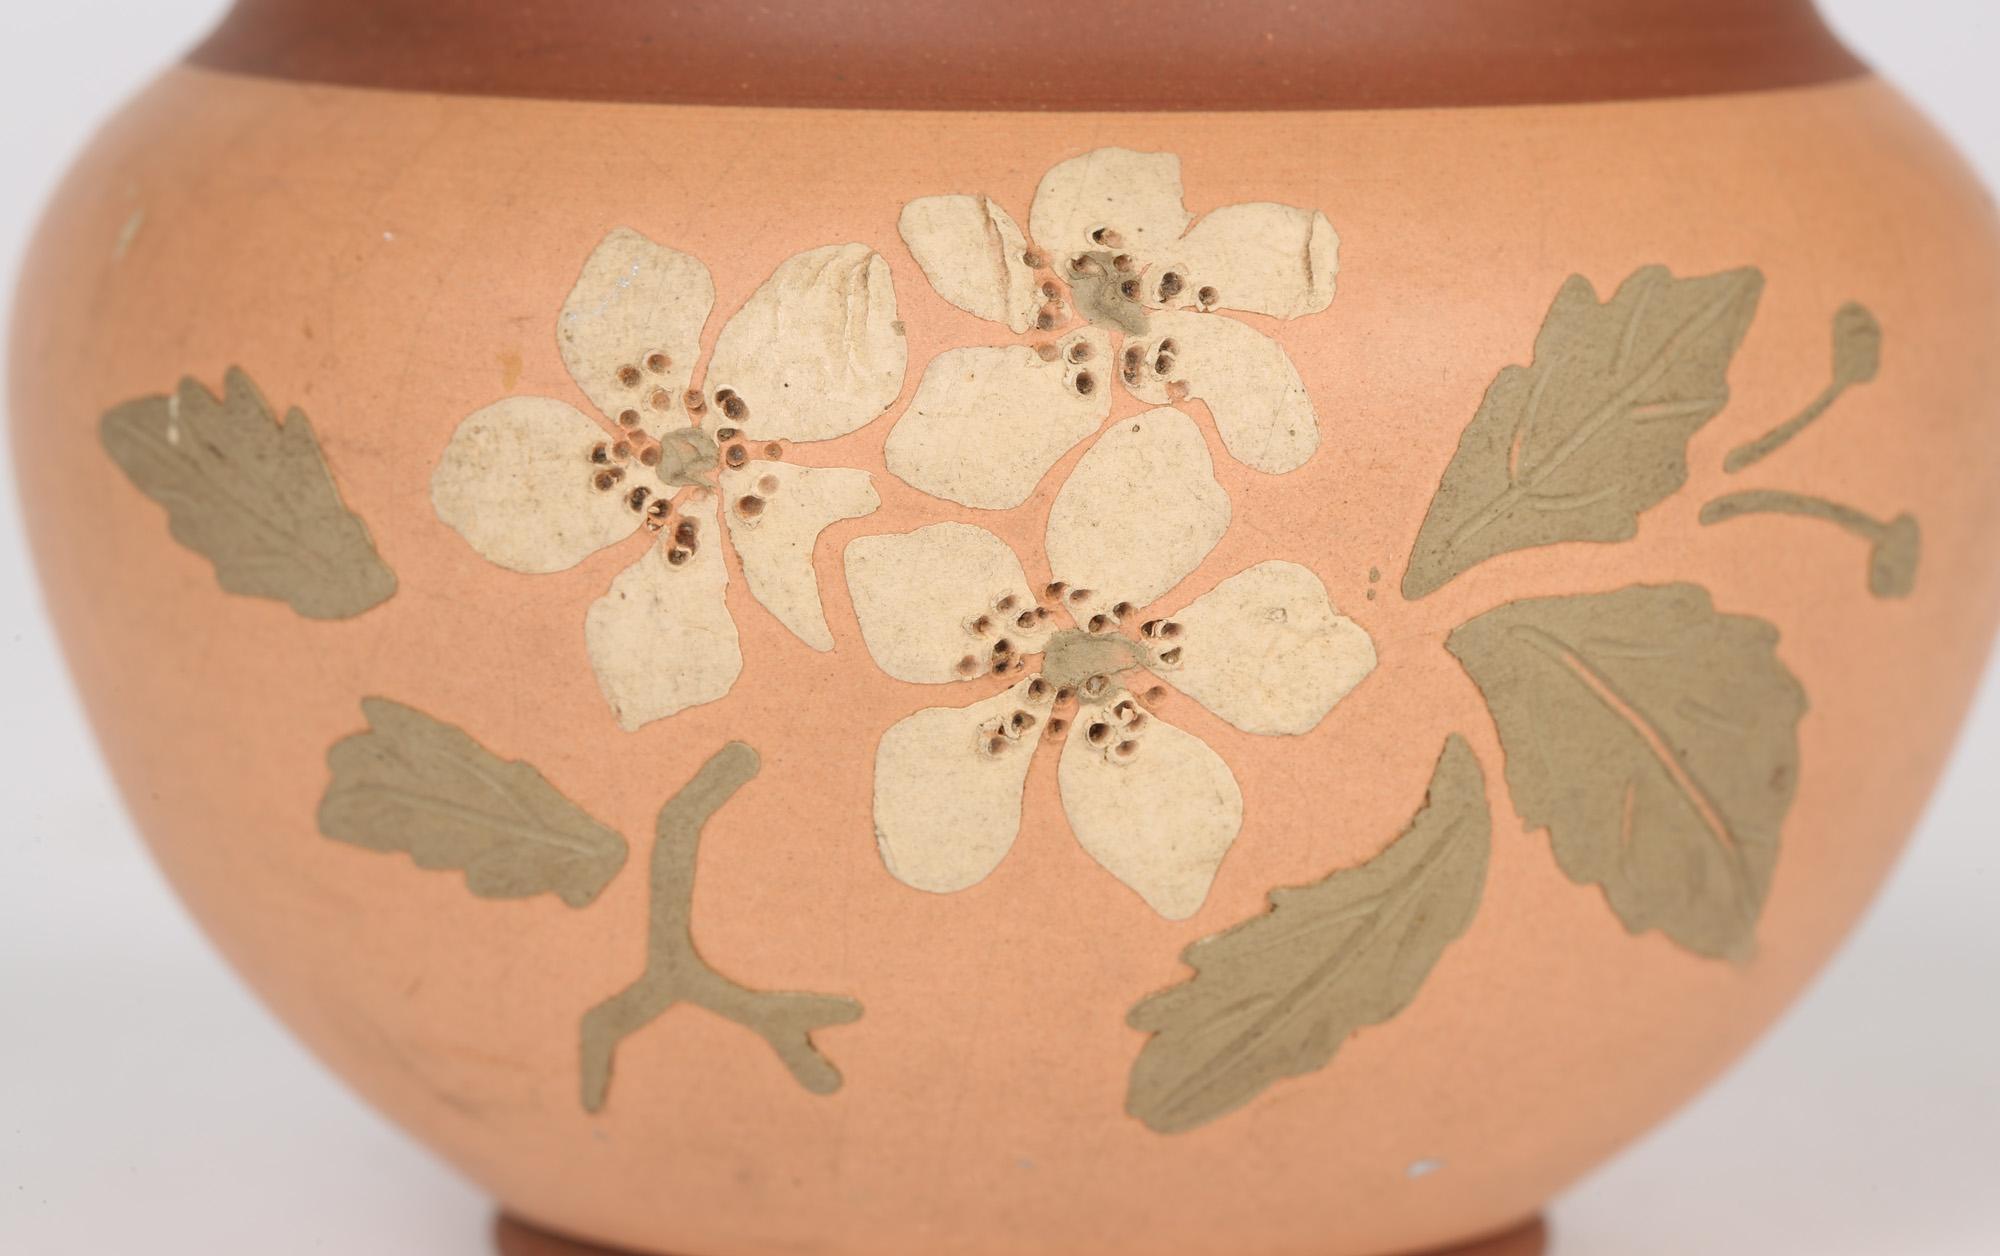 A very stylish aesthetic movement terracotta bowl with slip applied floral designs in the manner of Watcombe and design attributed to Christopher Dresser dating from around 1880. This very finely made bowl stands raised on a narrow rounded foot with